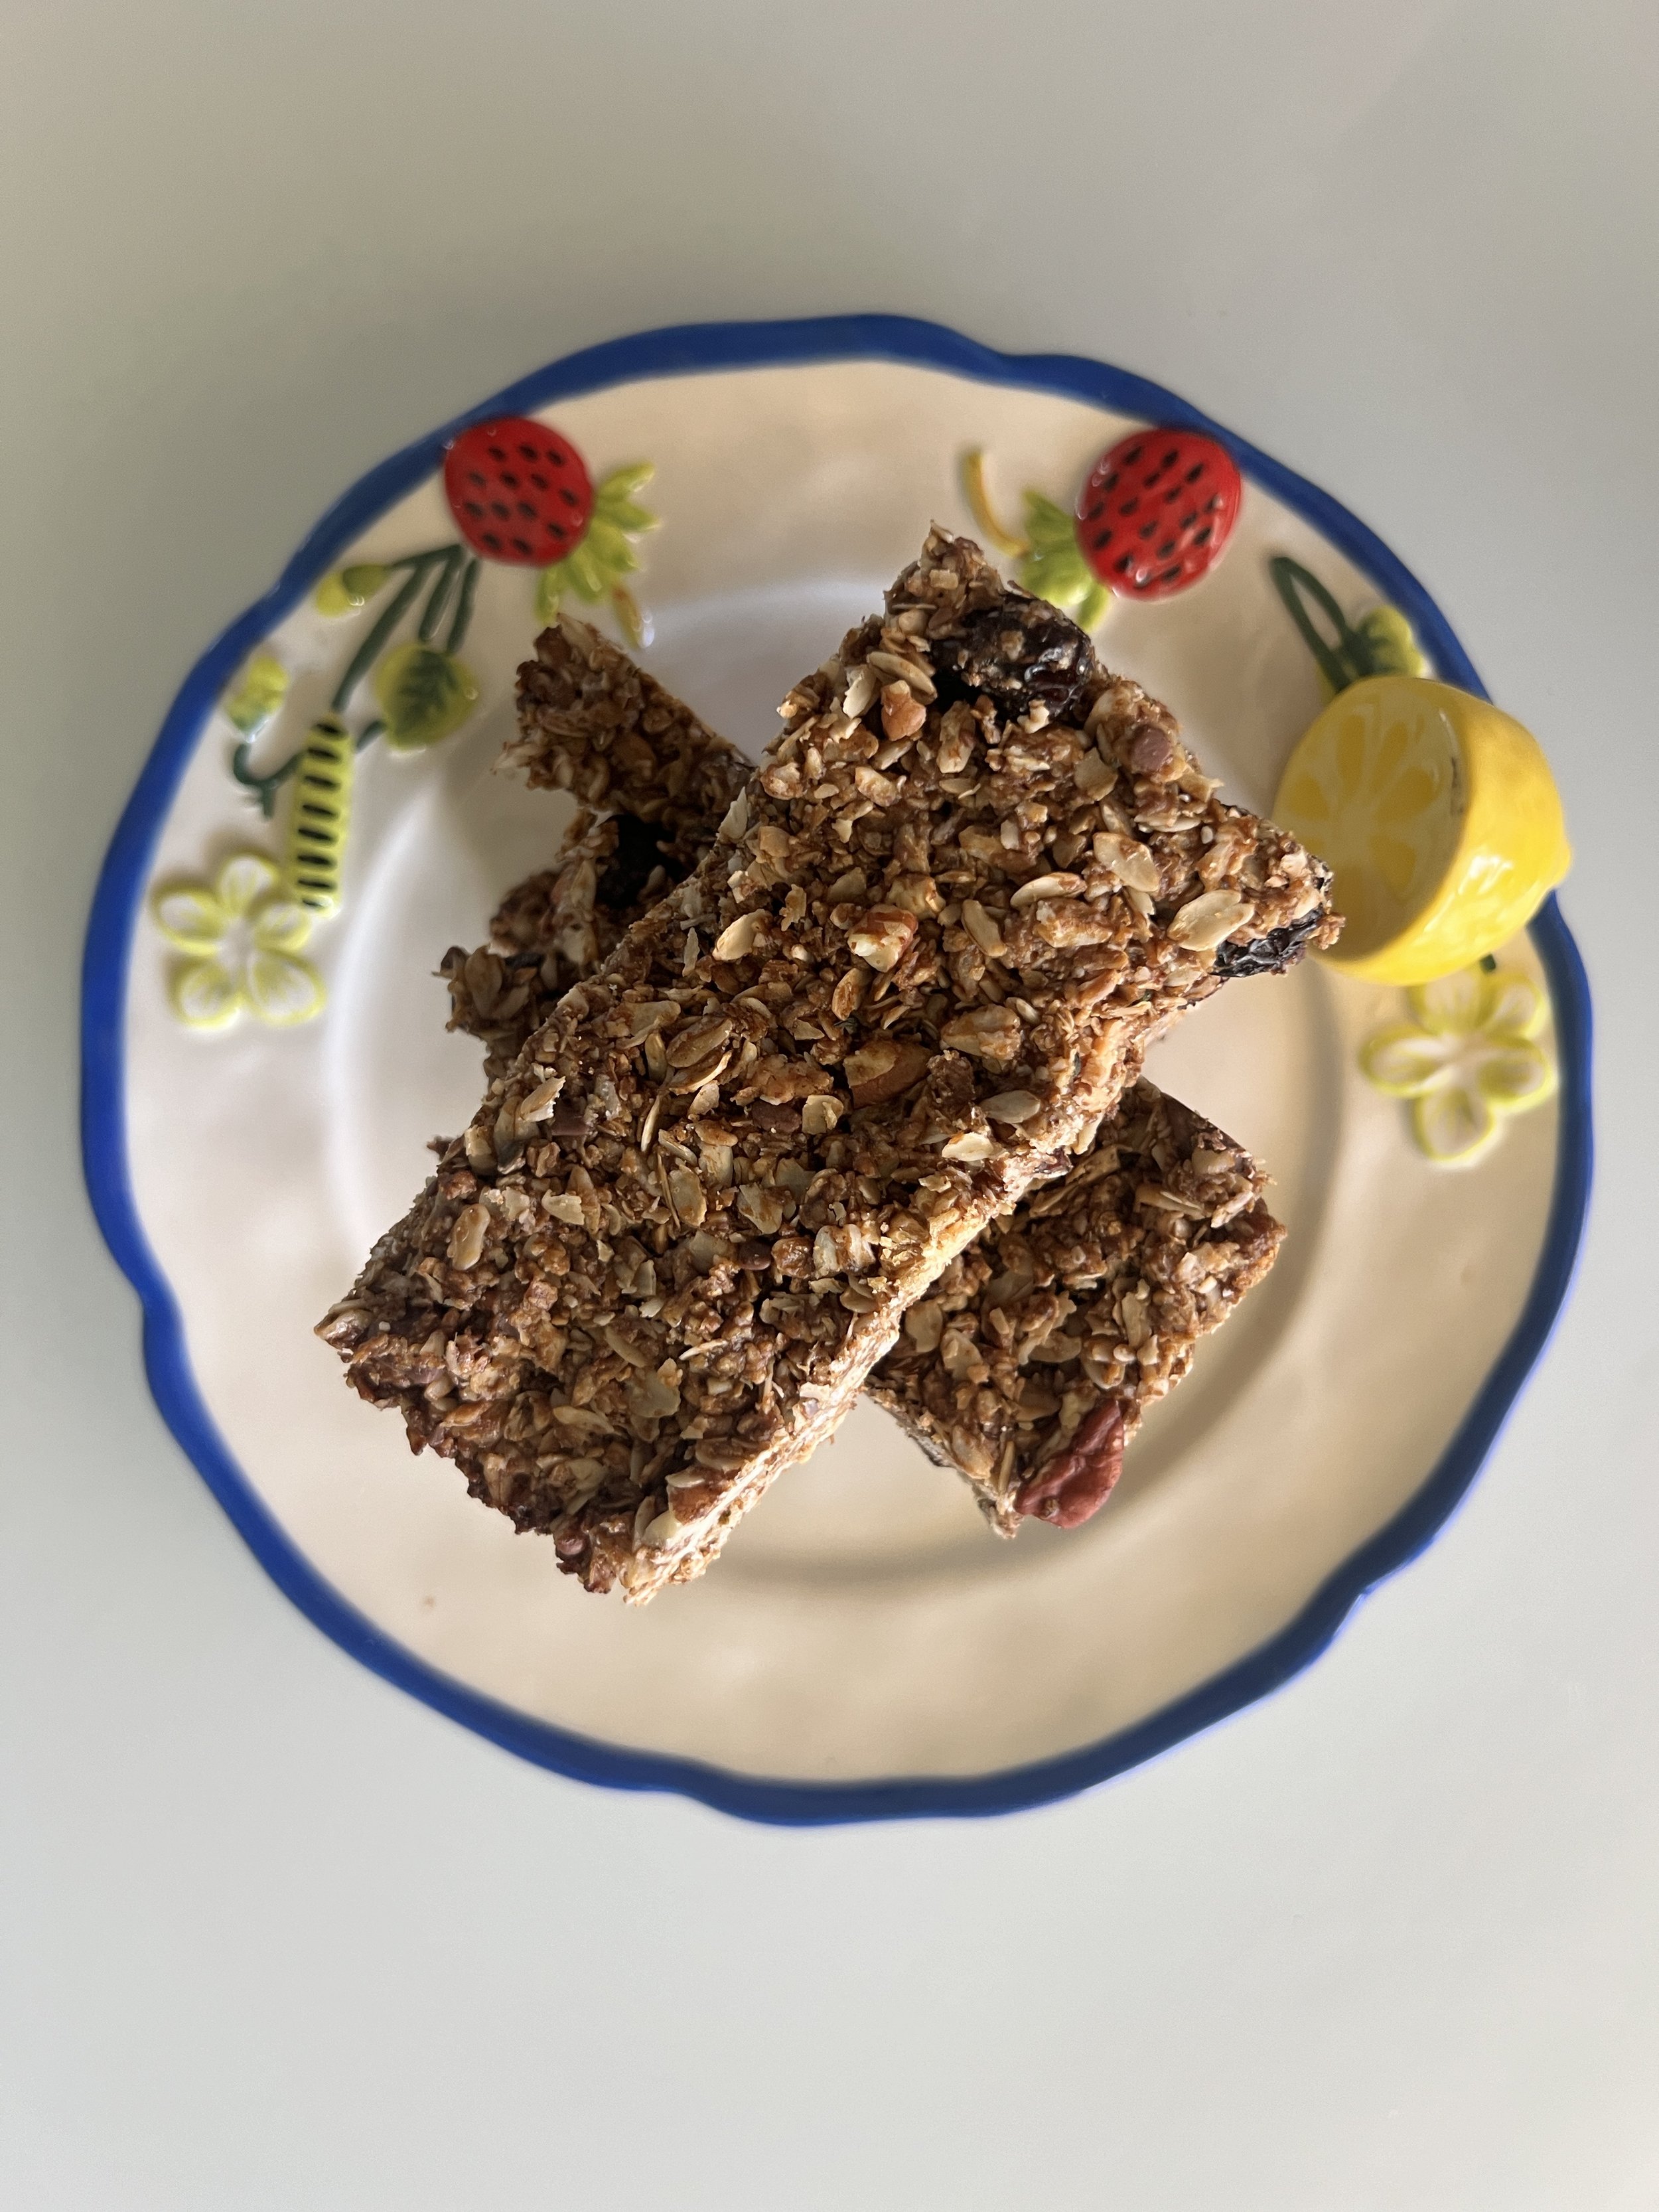 Easy nutrient dense chocolate and dried fruit granola bar recipe by Phoenix food photographer and local food blogger, Jennifer Lind Schutsky of Bitches Food Club.